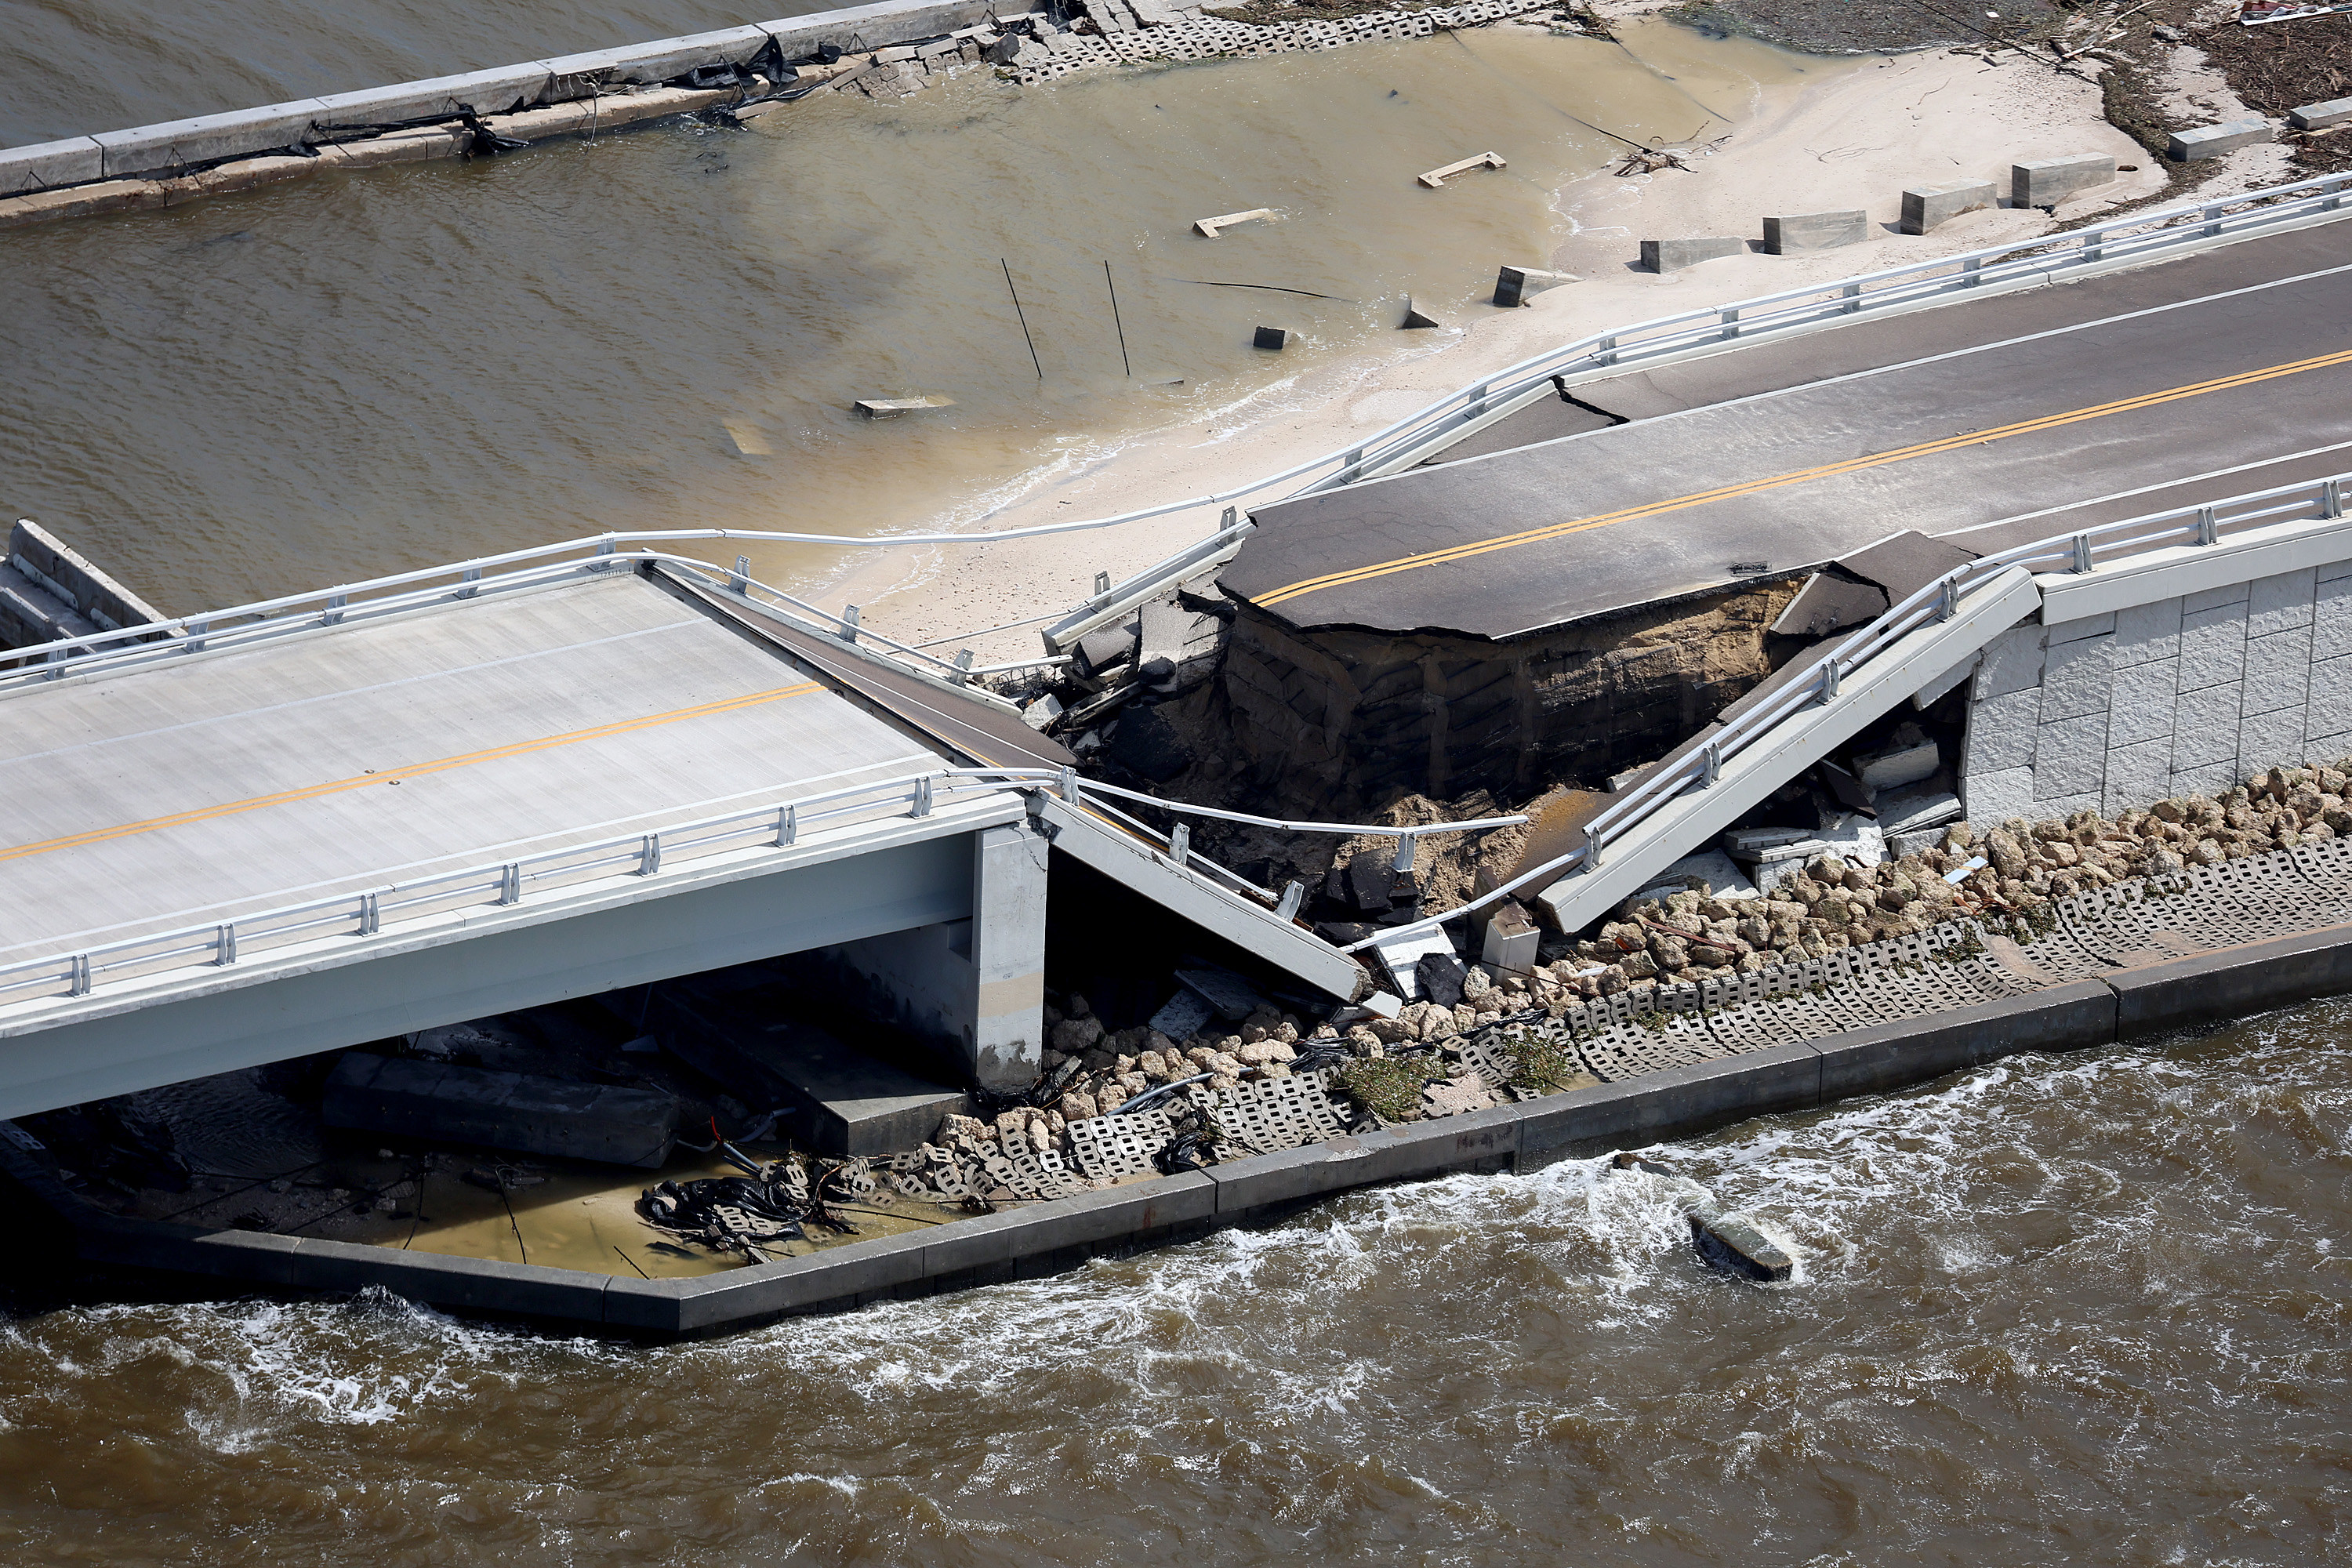 A bridge over a body of water is collapsed, with the two-lane road not connecting